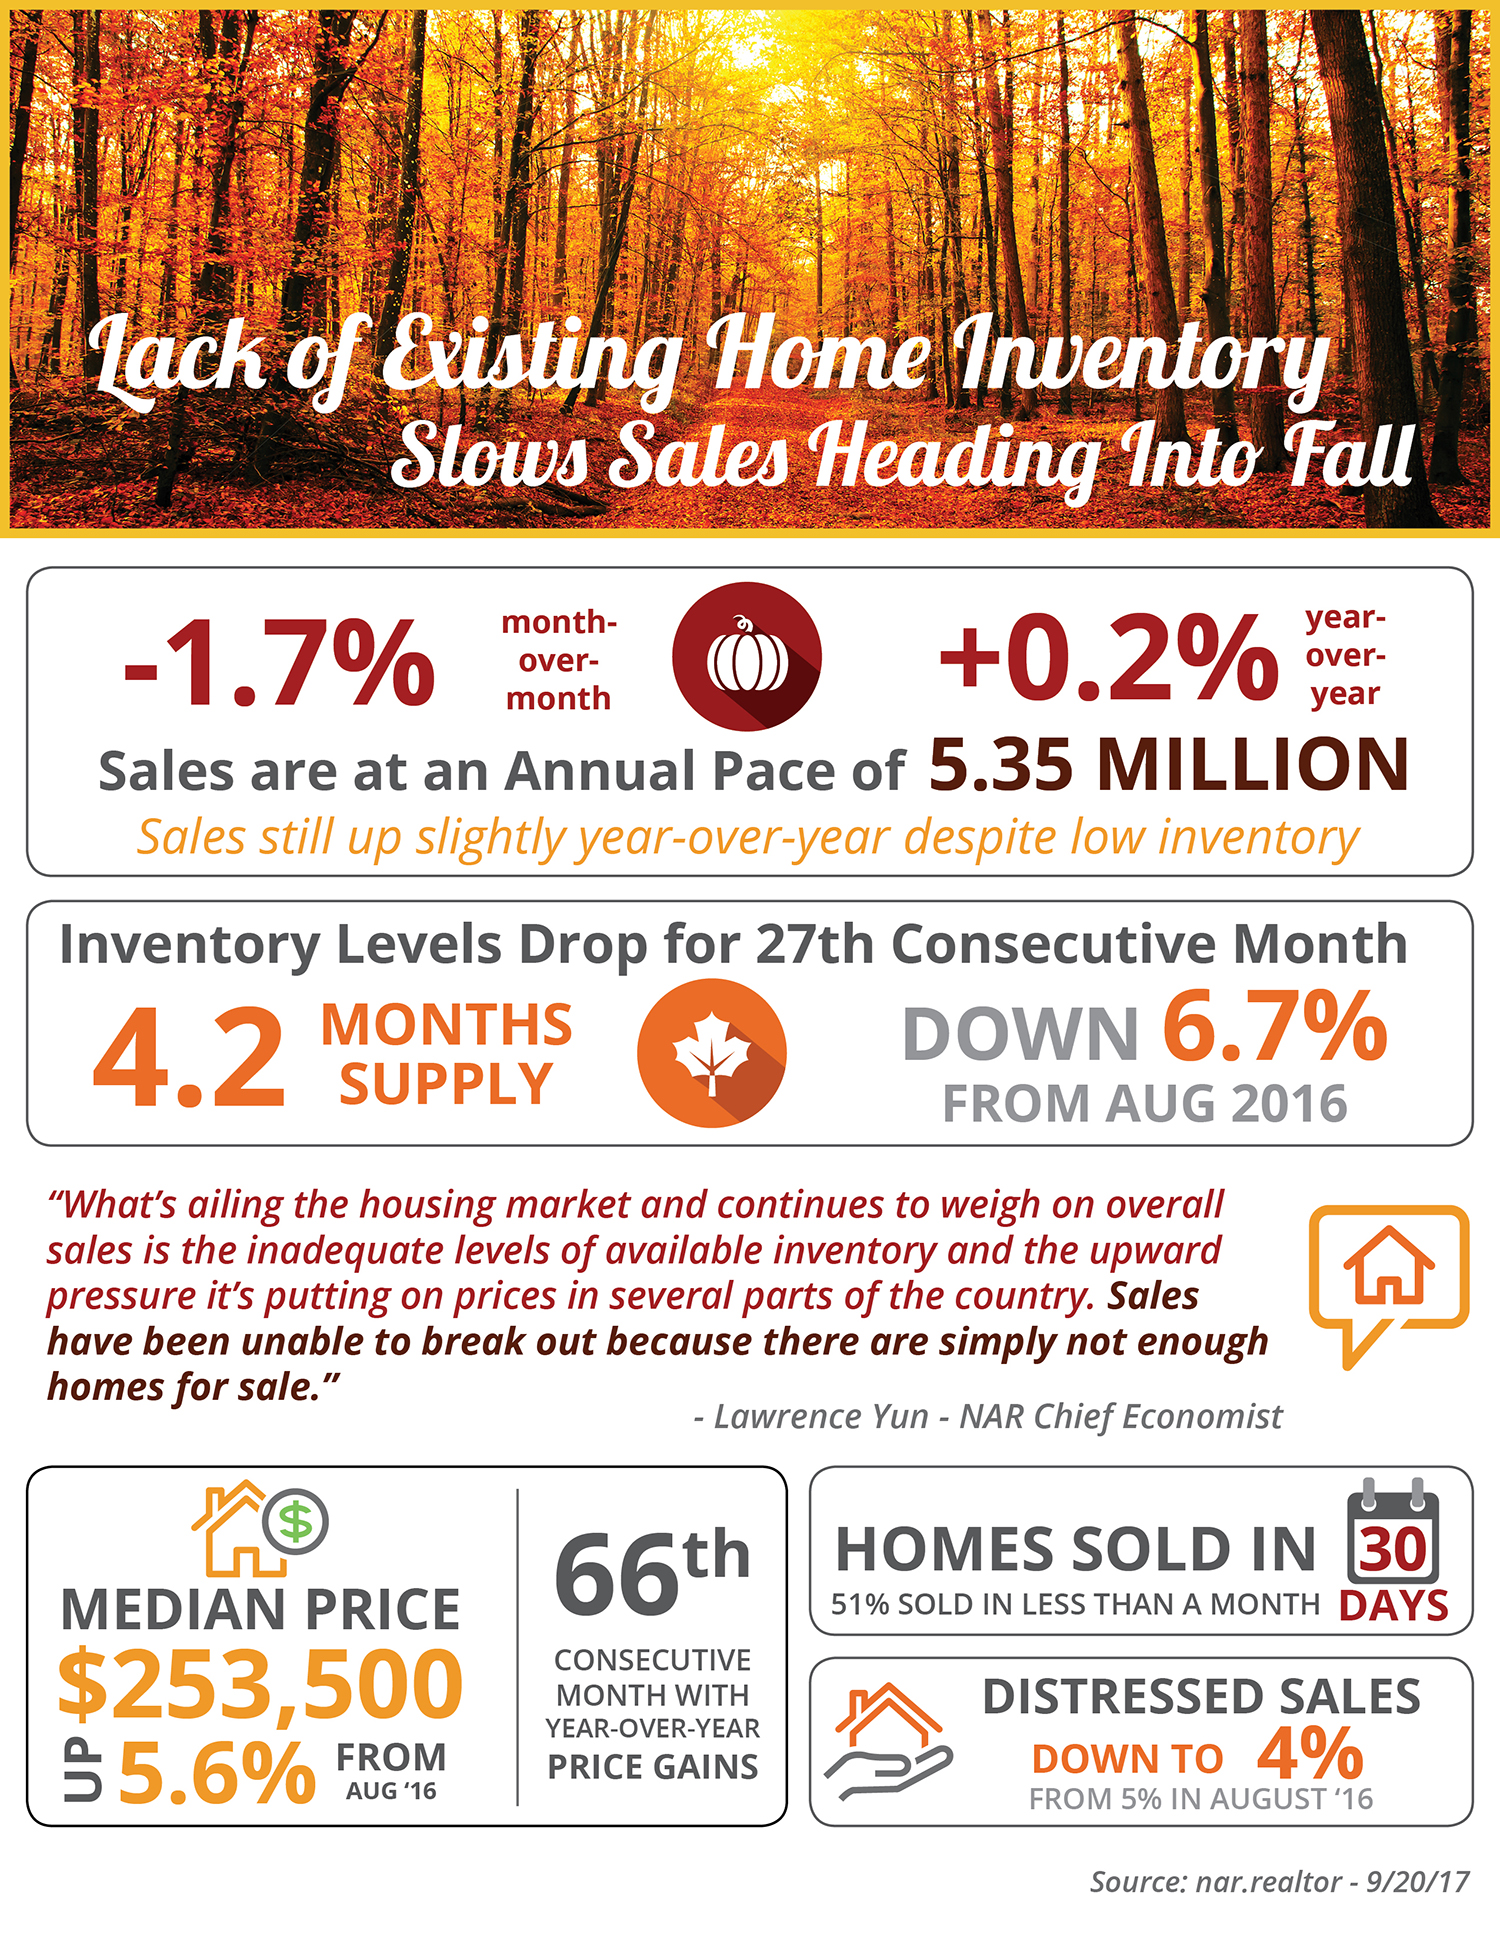 Lack of Existing Home Inventory Slows Sales Heading into Fall [INFOGRAPHIC] | Simplifying The Market